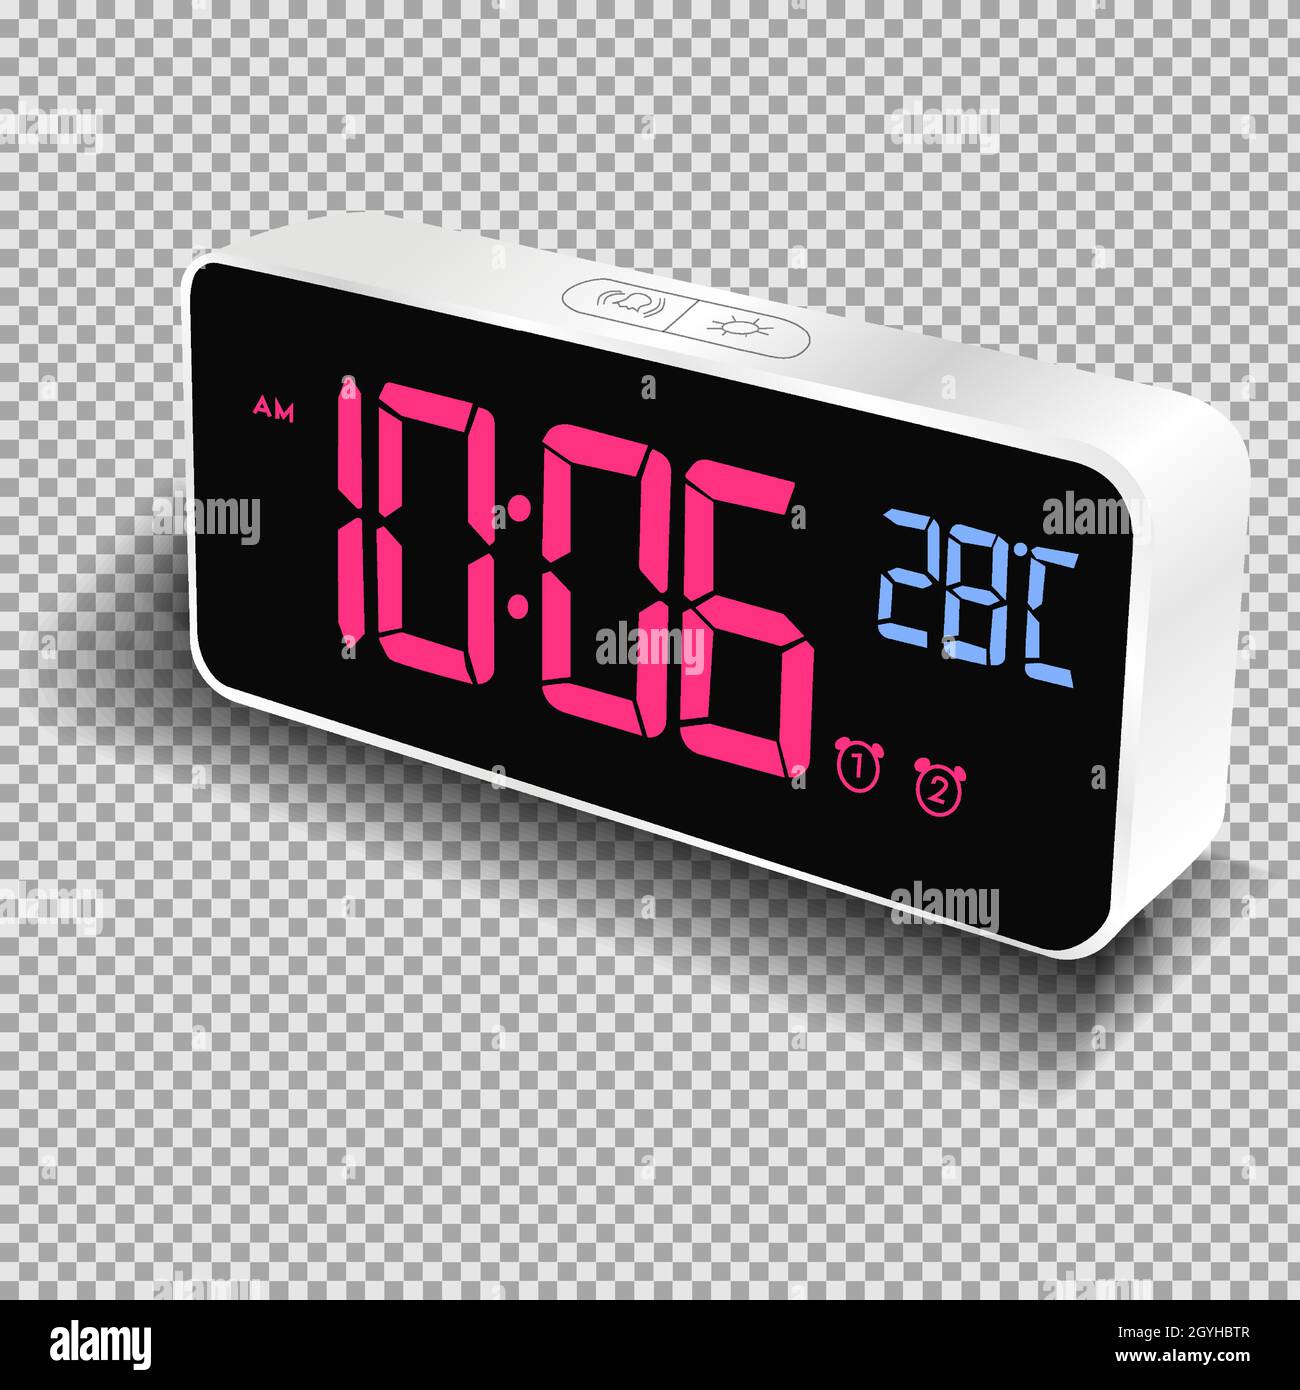 Realistic digital alarm clock with lcd display isolated vector illustration. EPS 10 Stock Vector